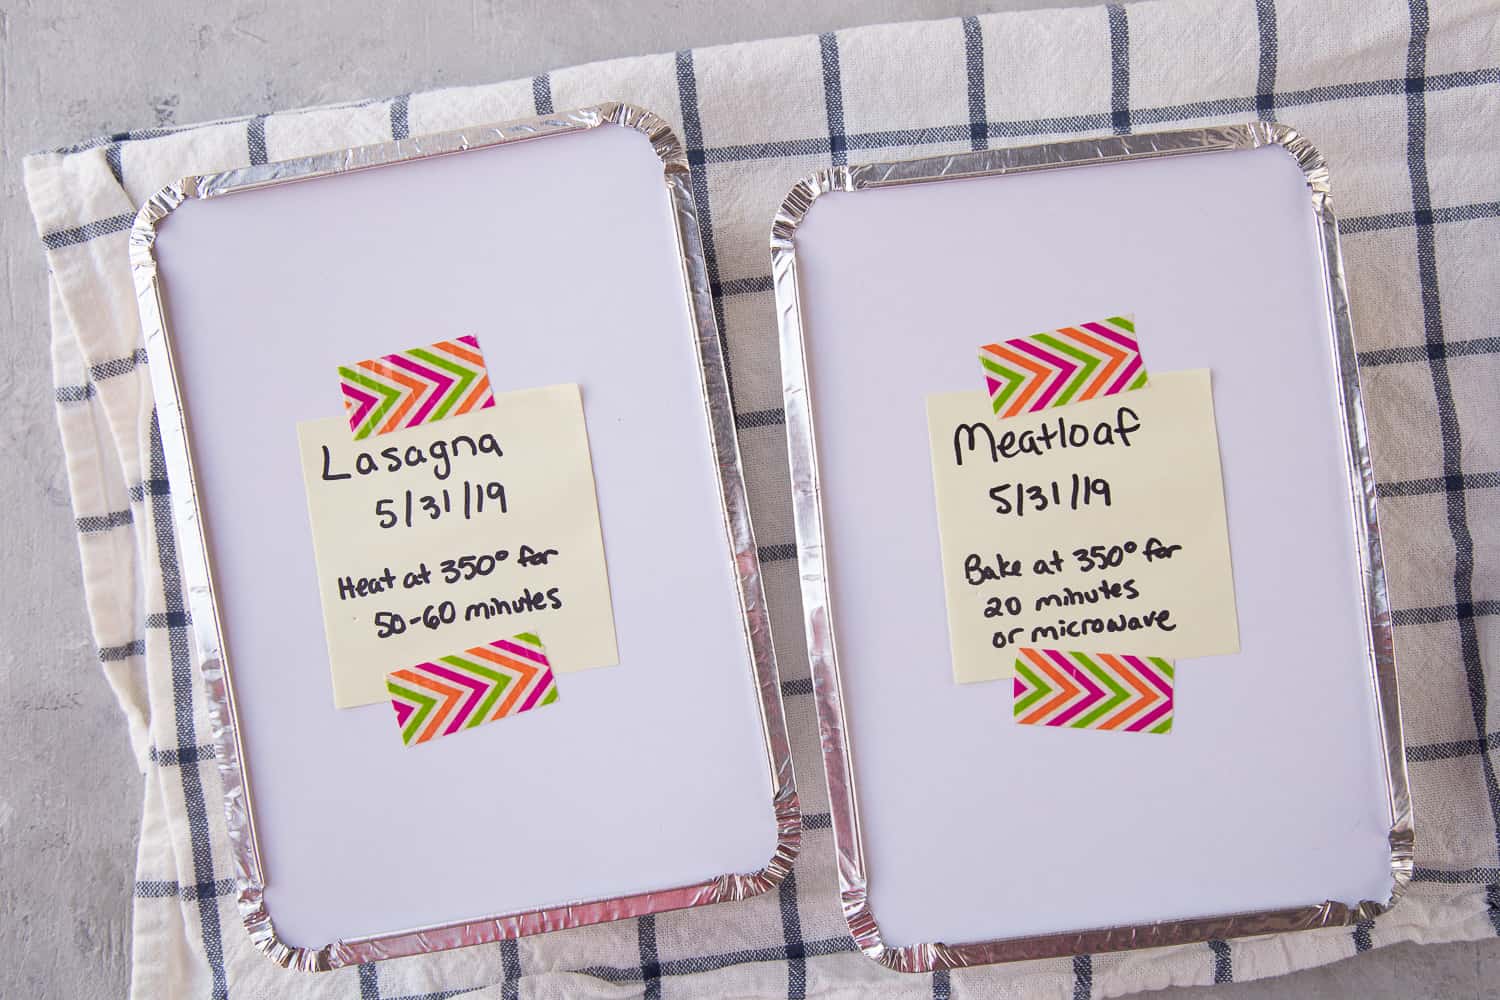 foil pans labeled with contents on post-it notes, taped with colorful washi tape.